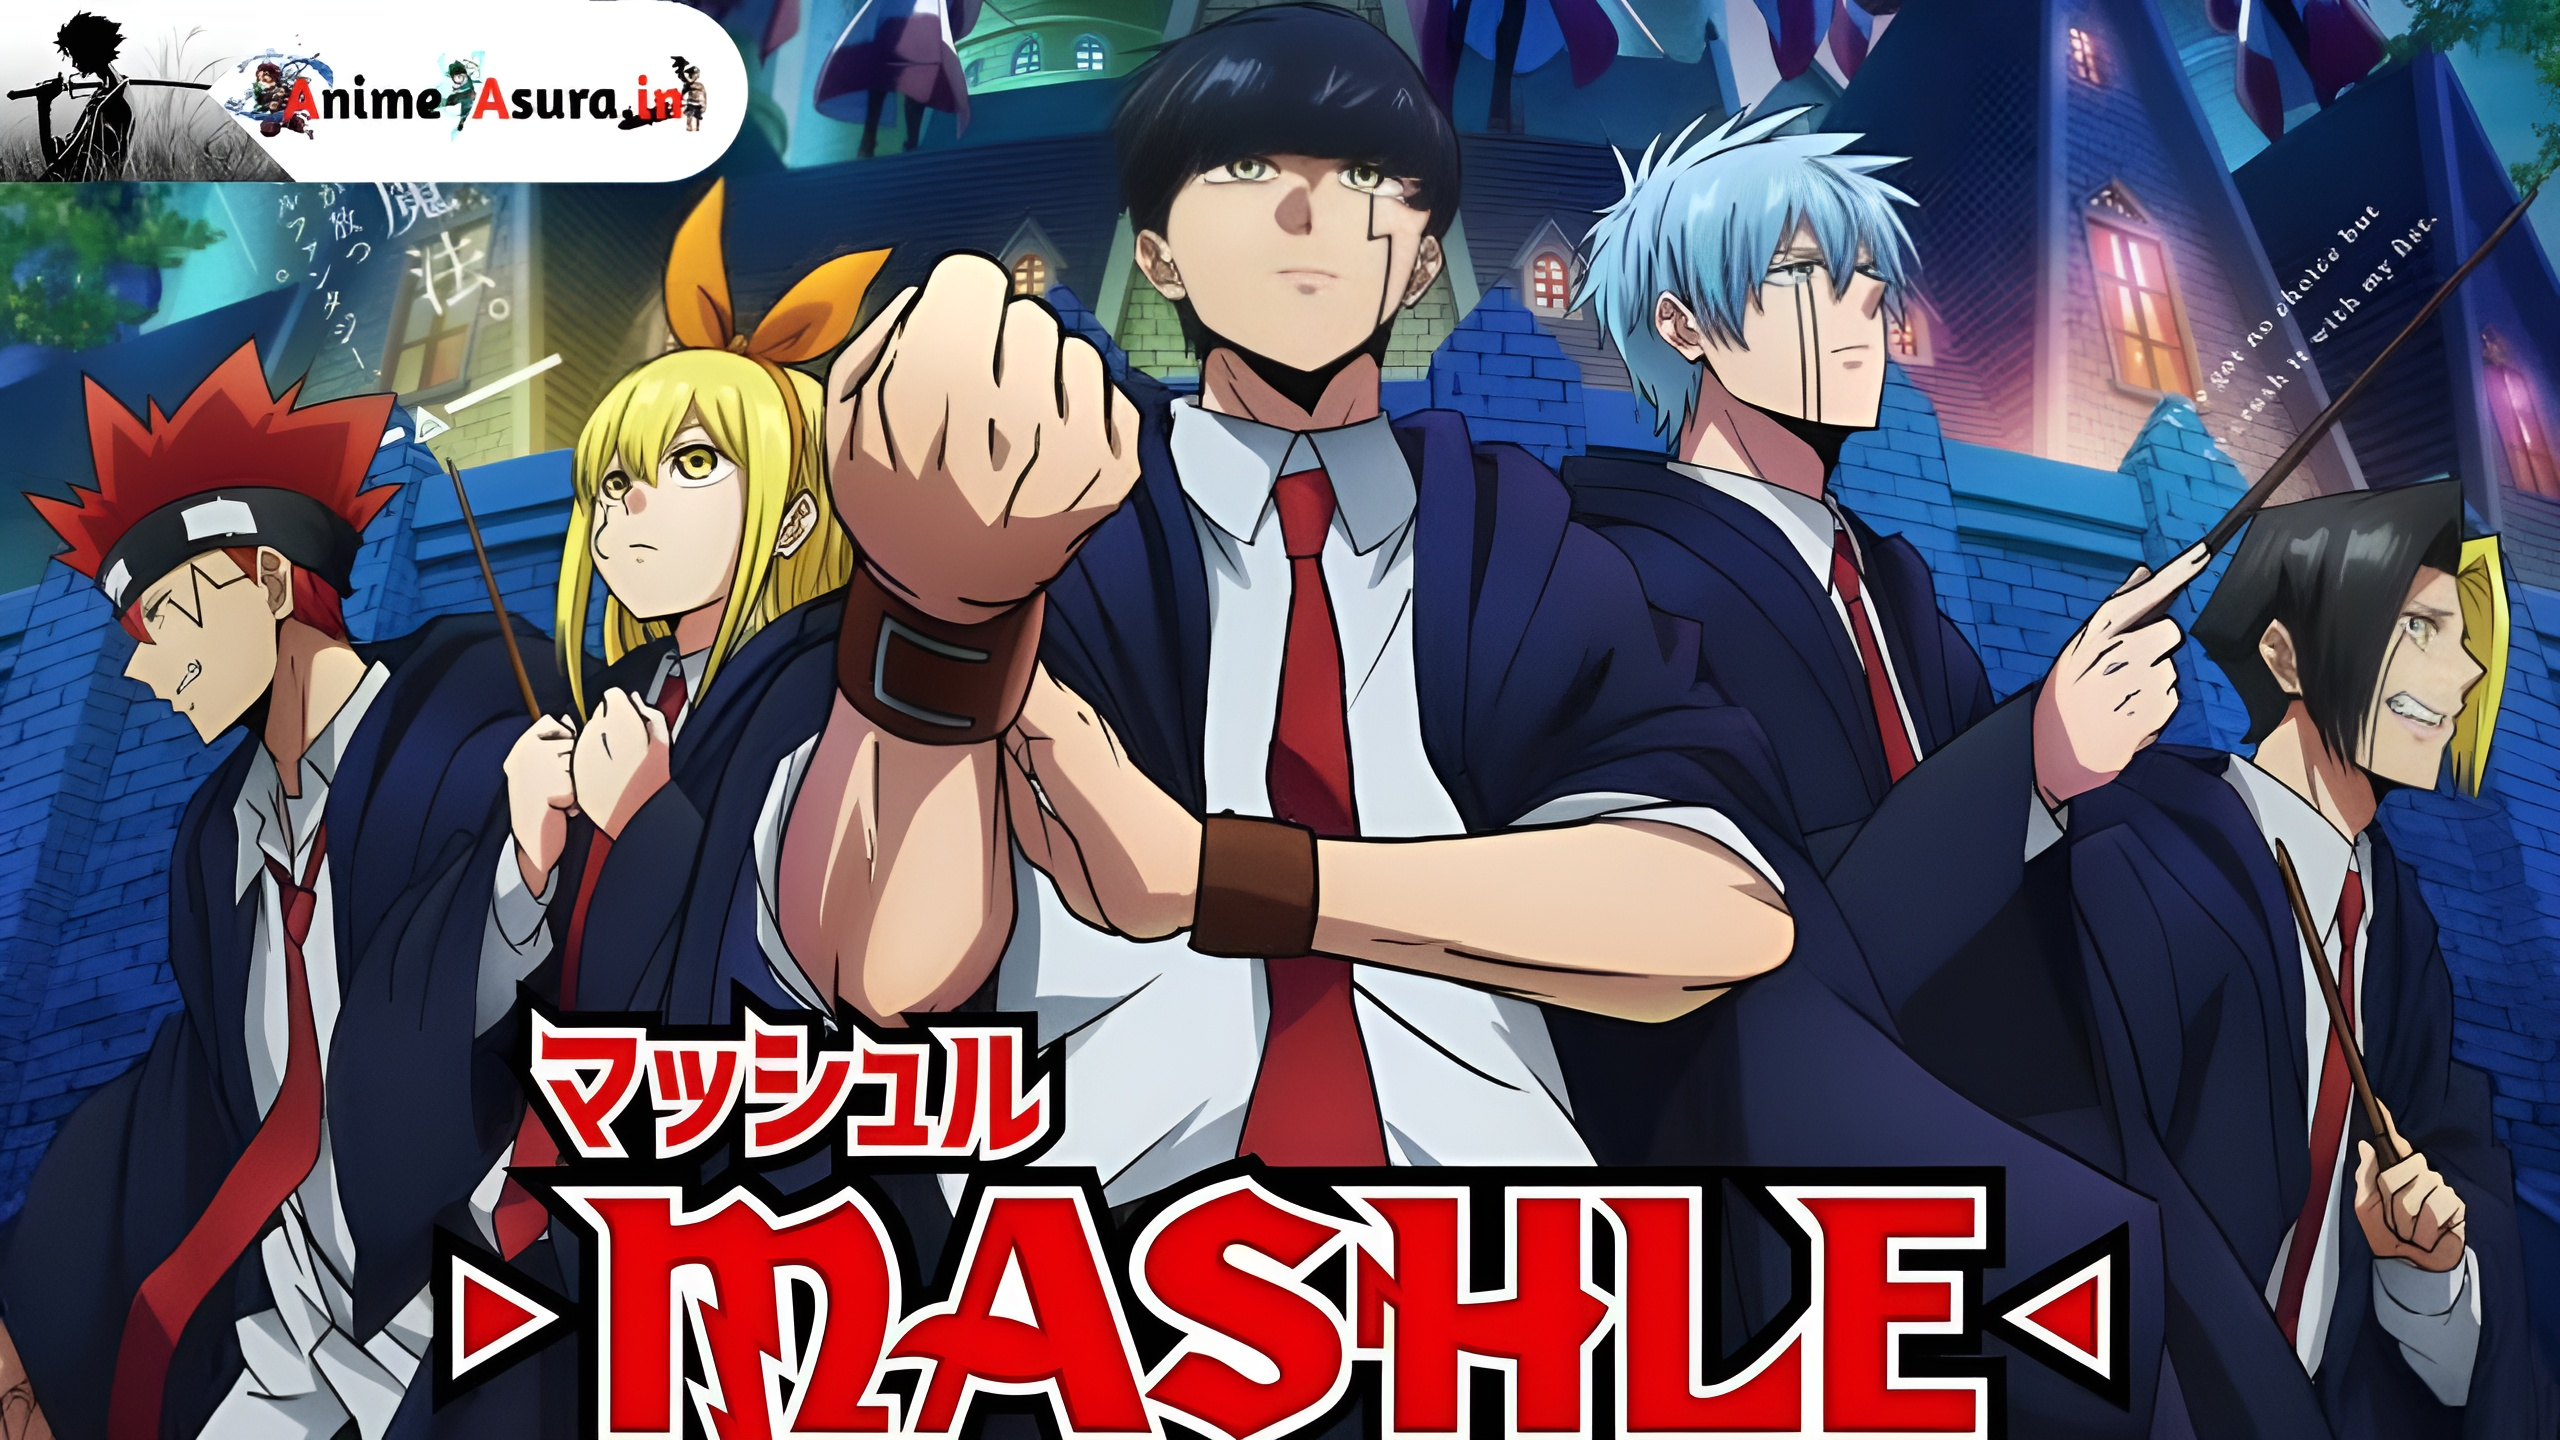 mashle magic and muscles episode 8 explained in hindi, 2023 new anime in  hindi